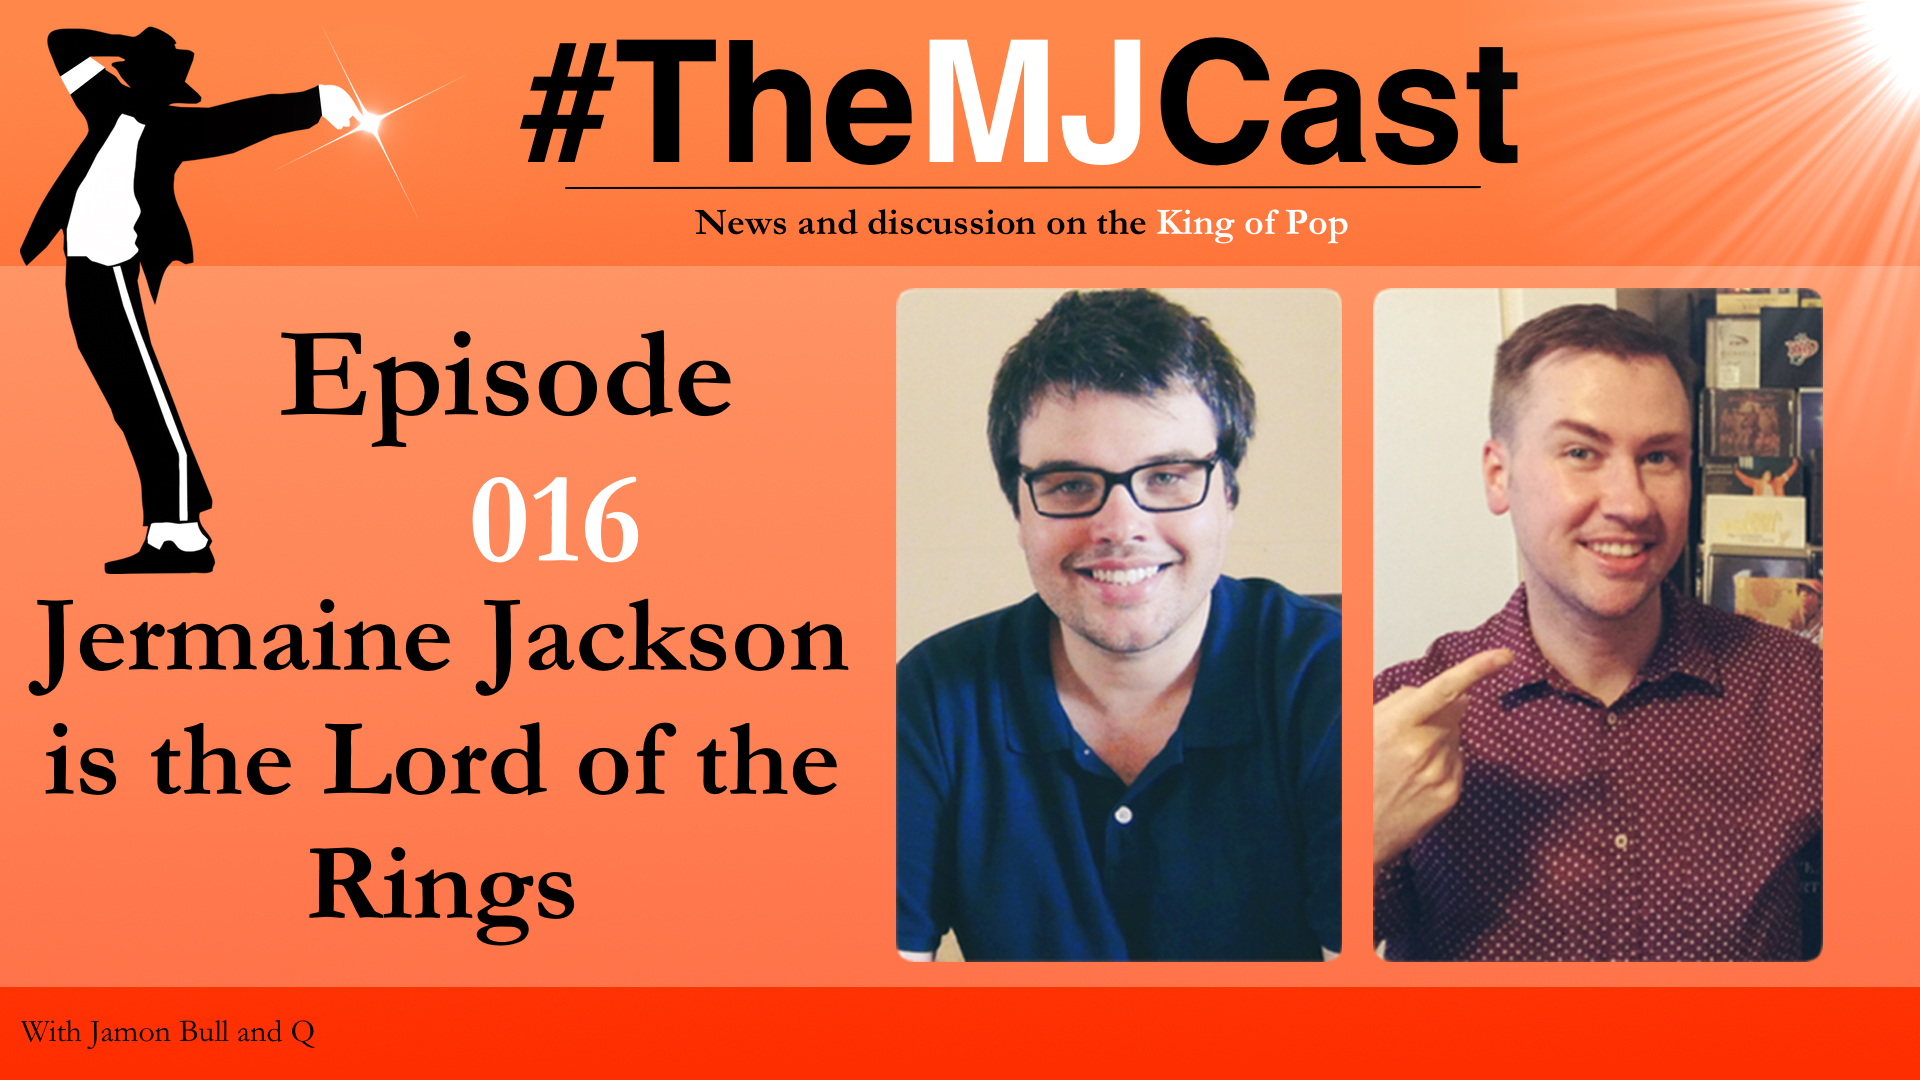 Episode 016 - Jermaine Jackson is the Lord of the Rings YouTube Art